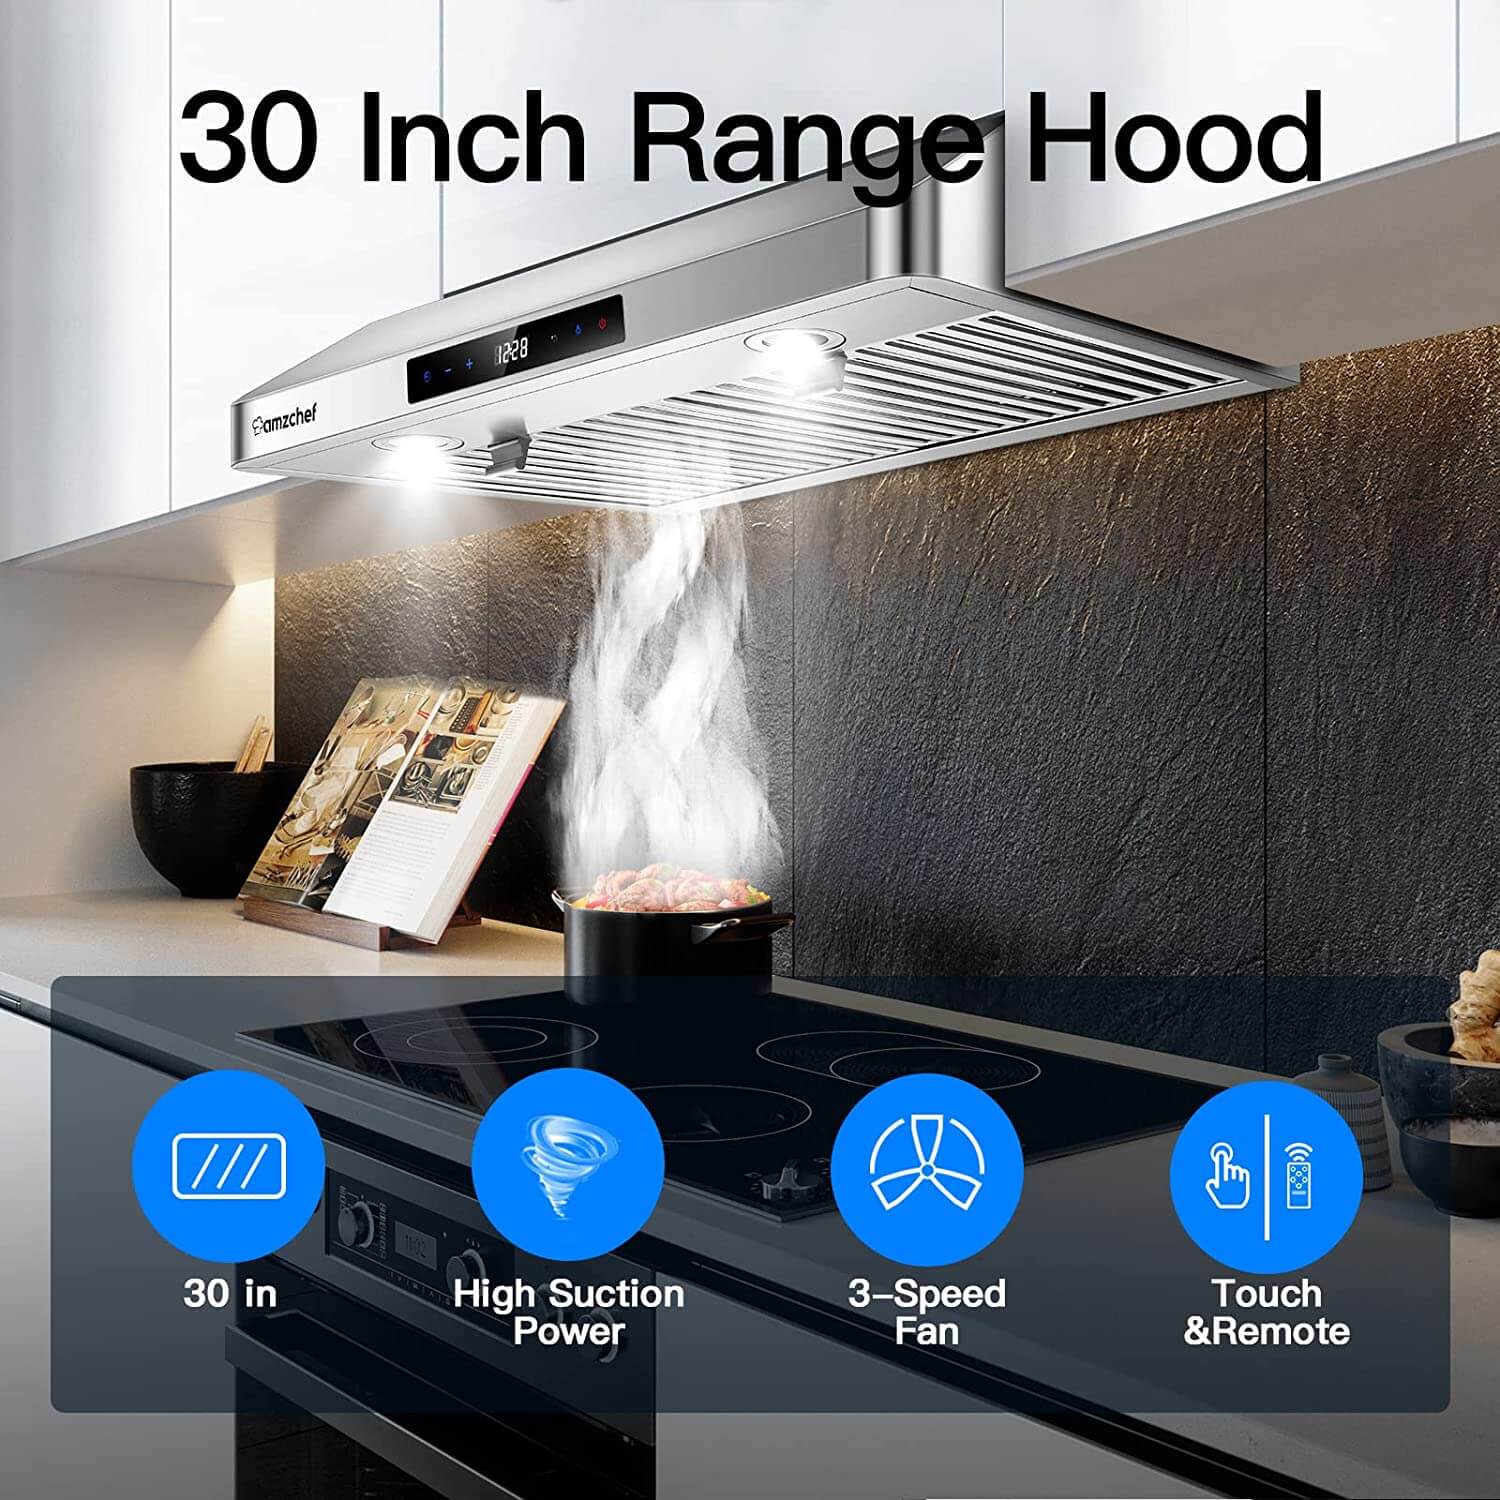 https://cdn.shopify.com/s/files/1/0592/2517/8292/products/AMZCHEF_range_hood_30inch_under_cabinet_700CFM_stainless_steel_kitchen_stove_vent_hood_2.jpg?v=1662566896&width=1500